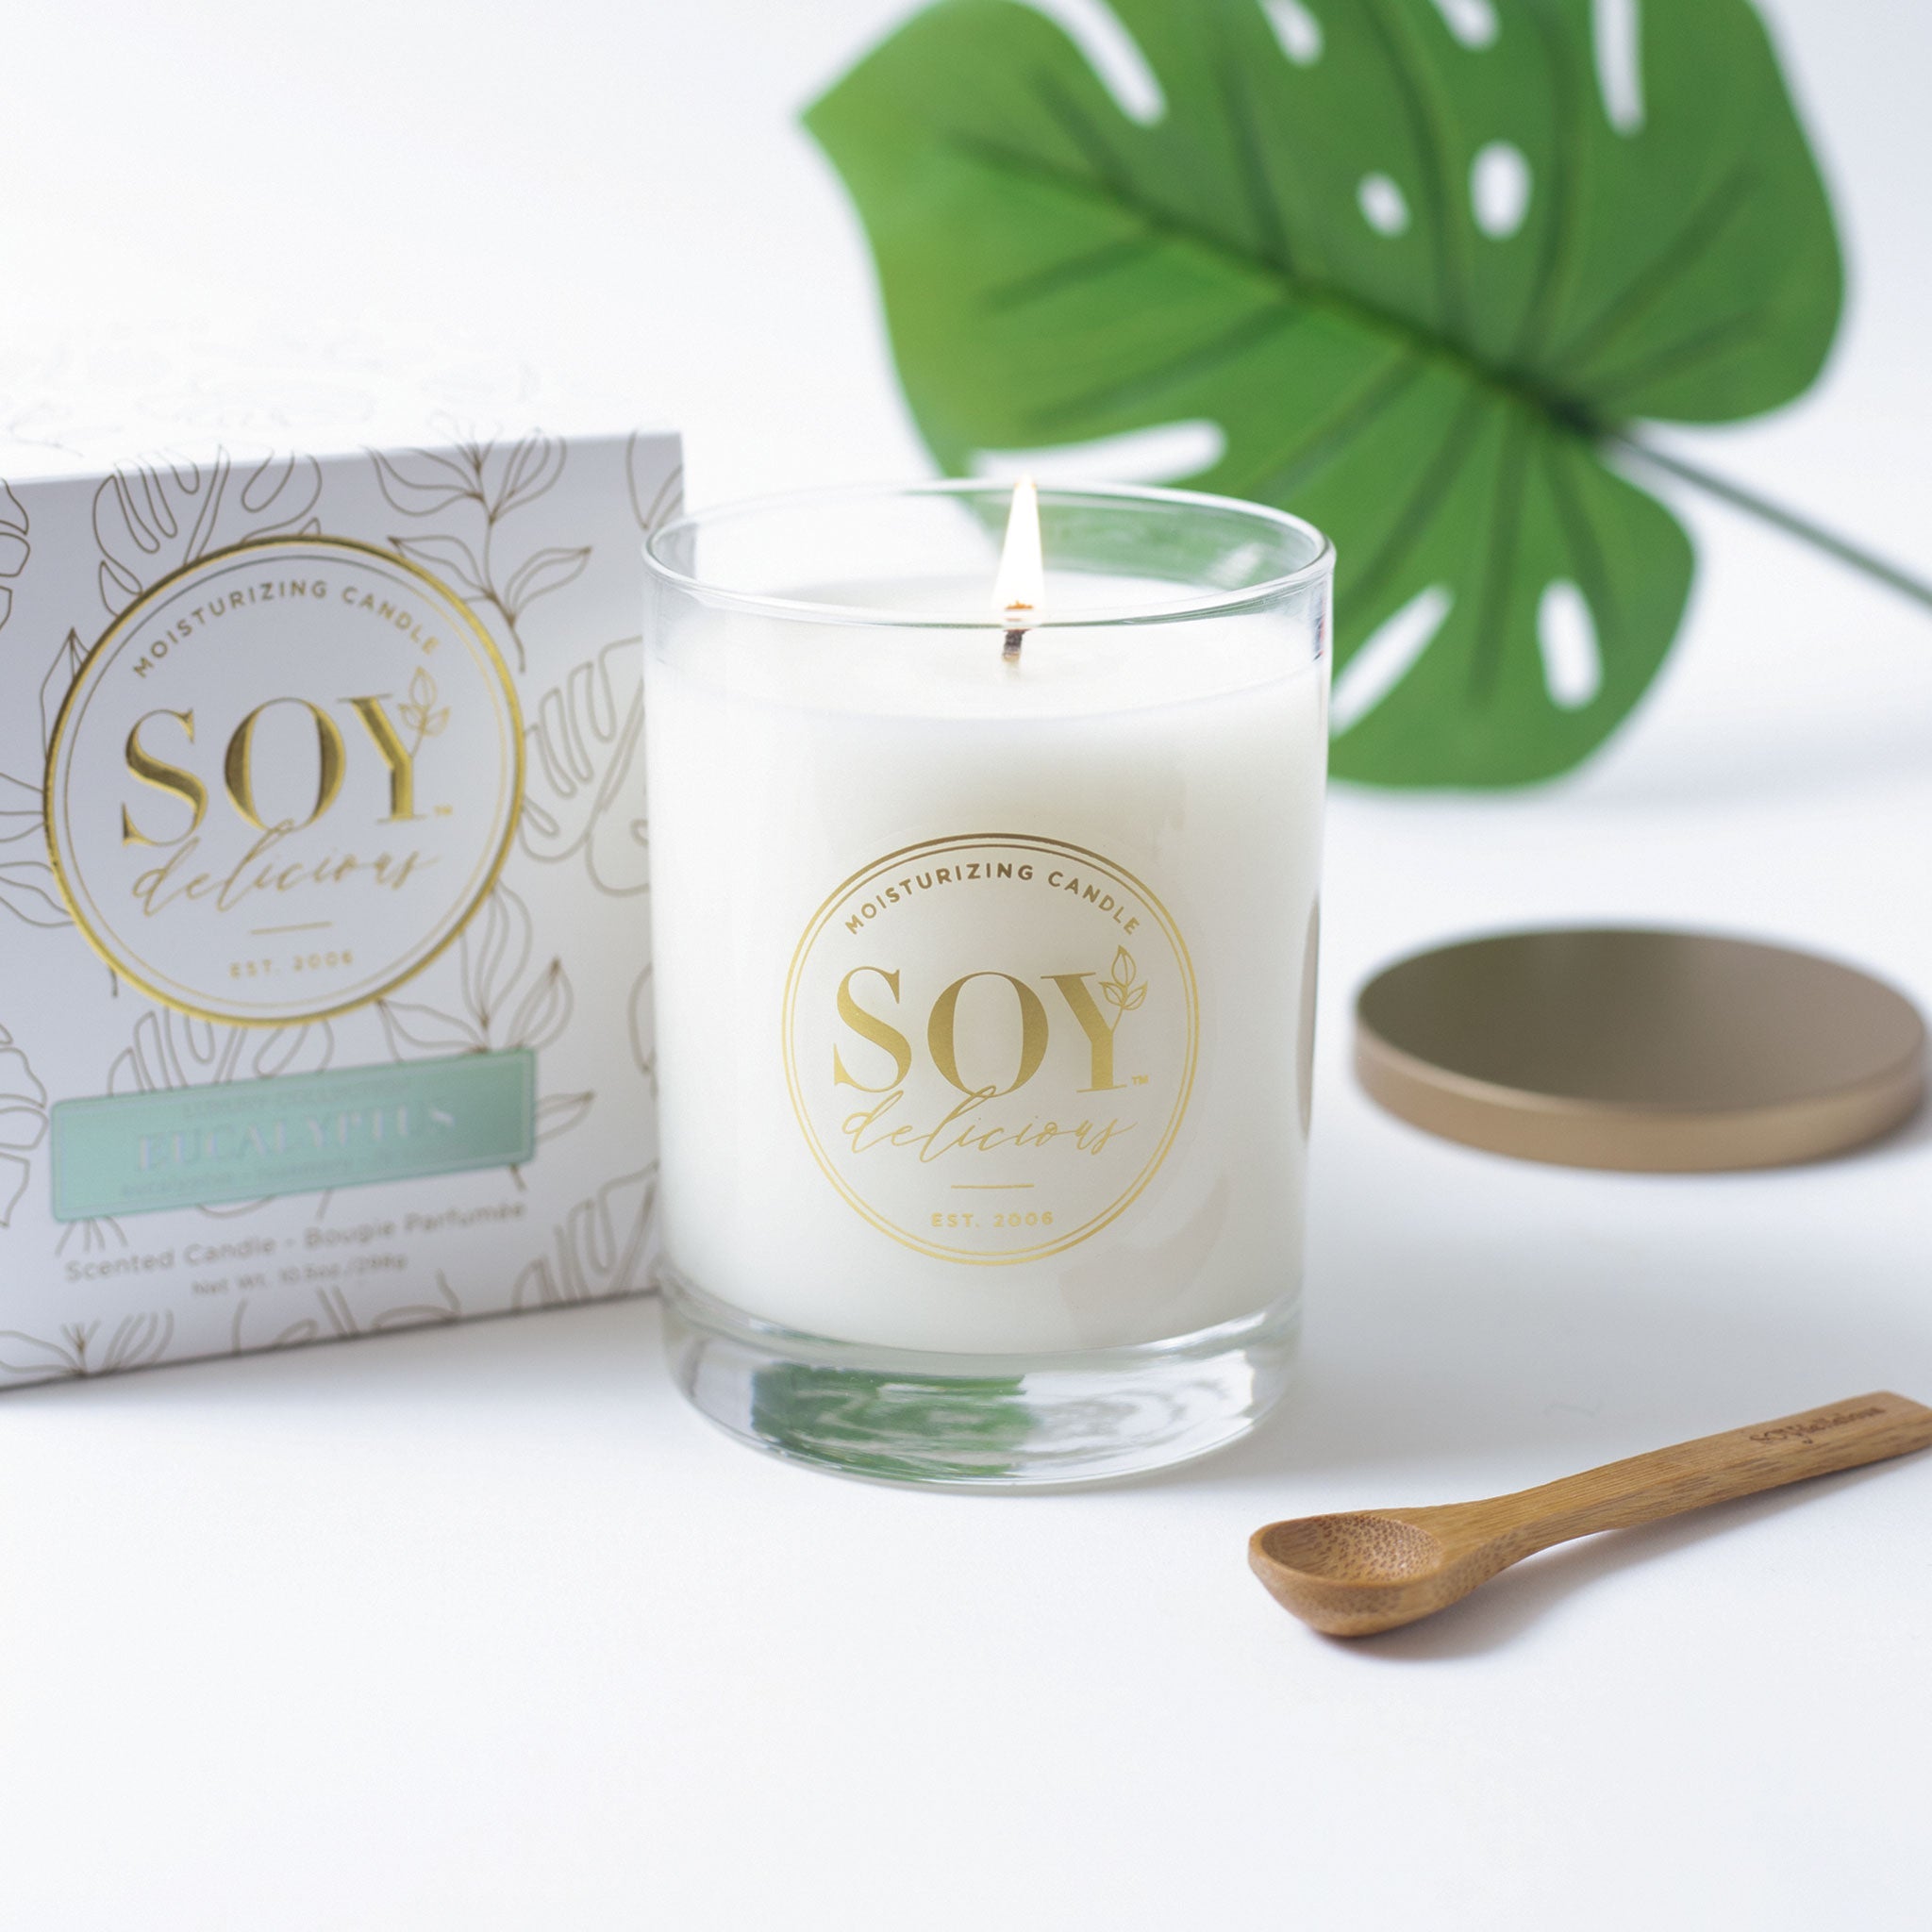 Soy Delicious Candle